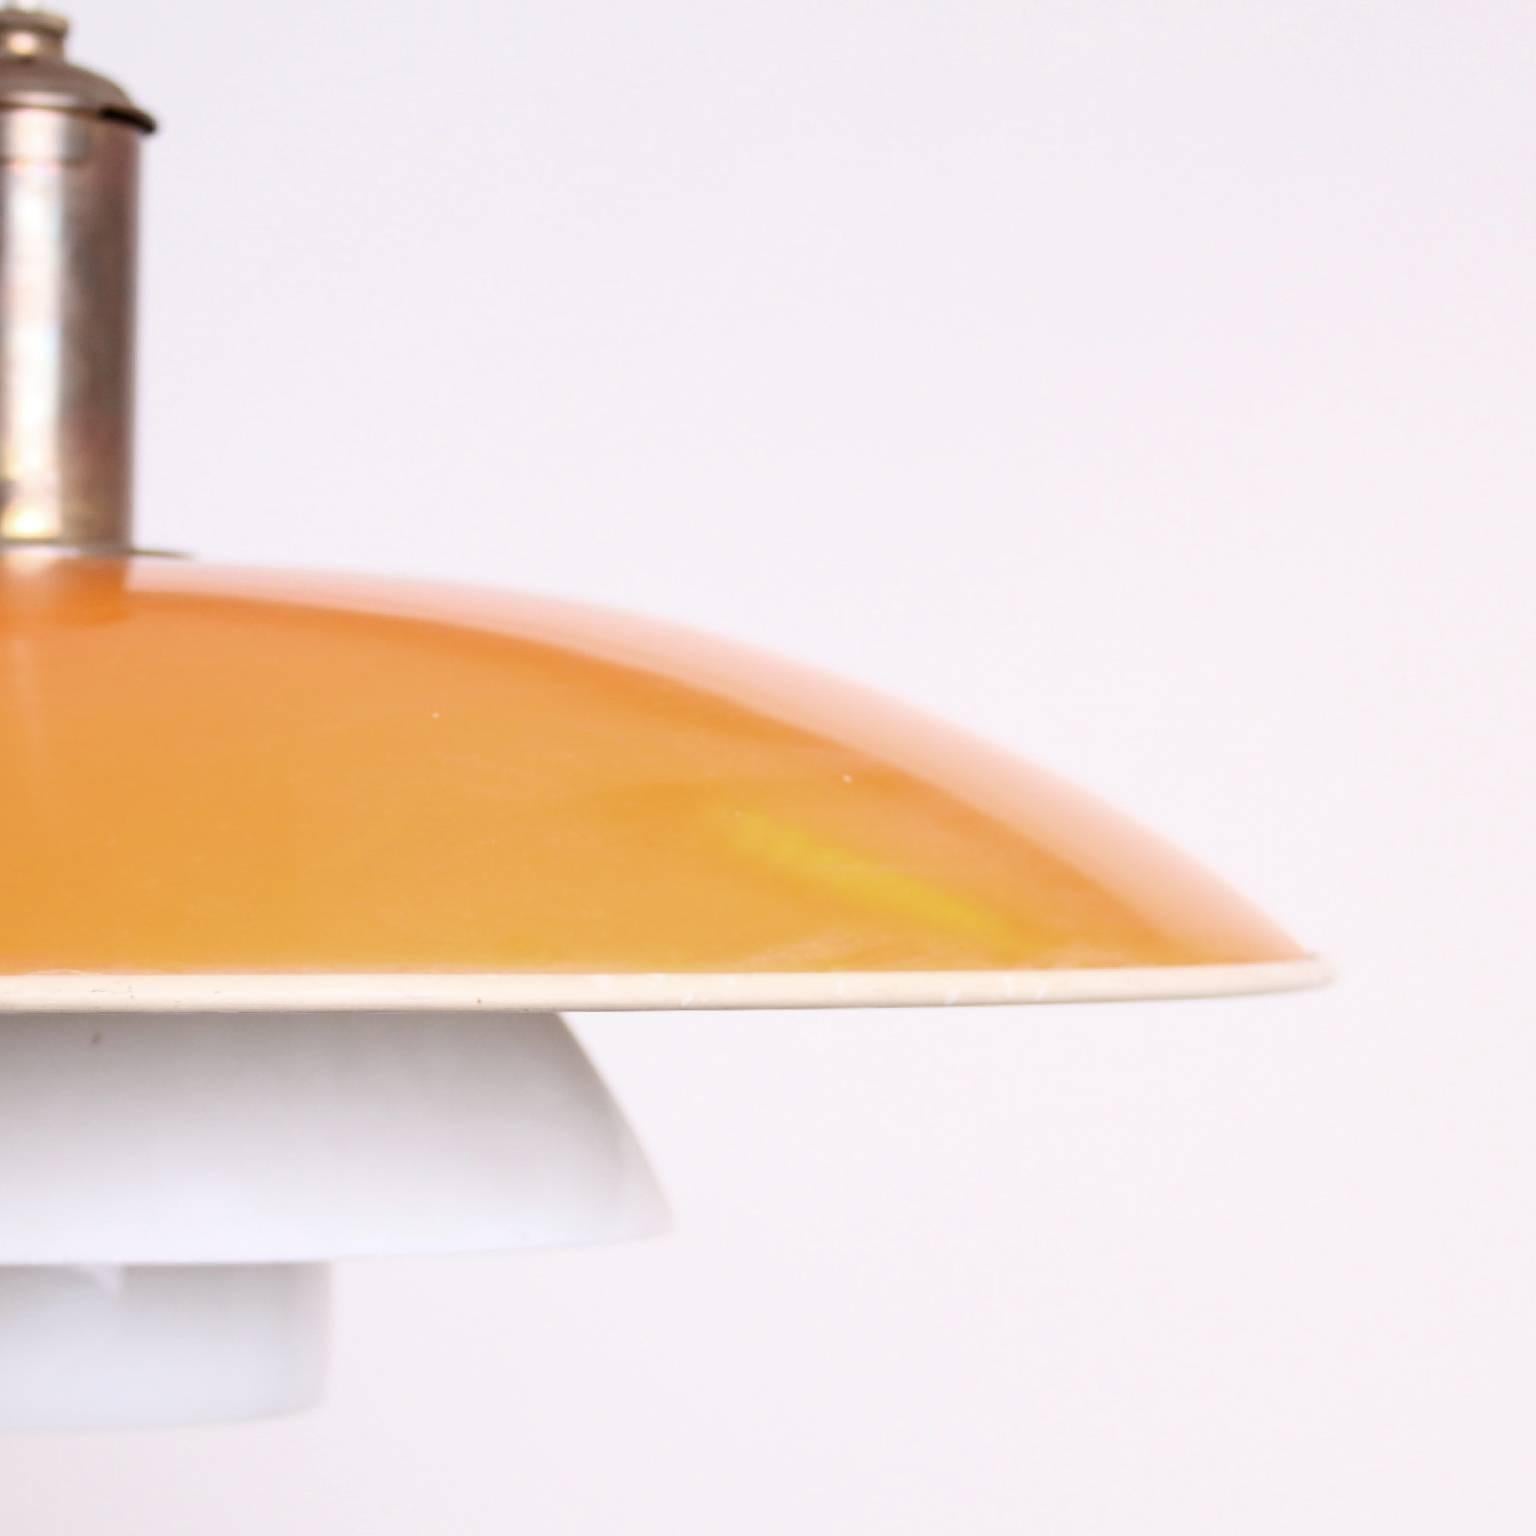 POUL HENNINGSEN AND LOUIS POULSEN

SCANDINAVIAN MODERN

This original ceiling lamp PH 5/4 was designed by Poul Henningsen and manufactured by Louis Poulsen, Denmark, 1940s. 

The materials are yellow enameled metal top shade, center and bottom shade